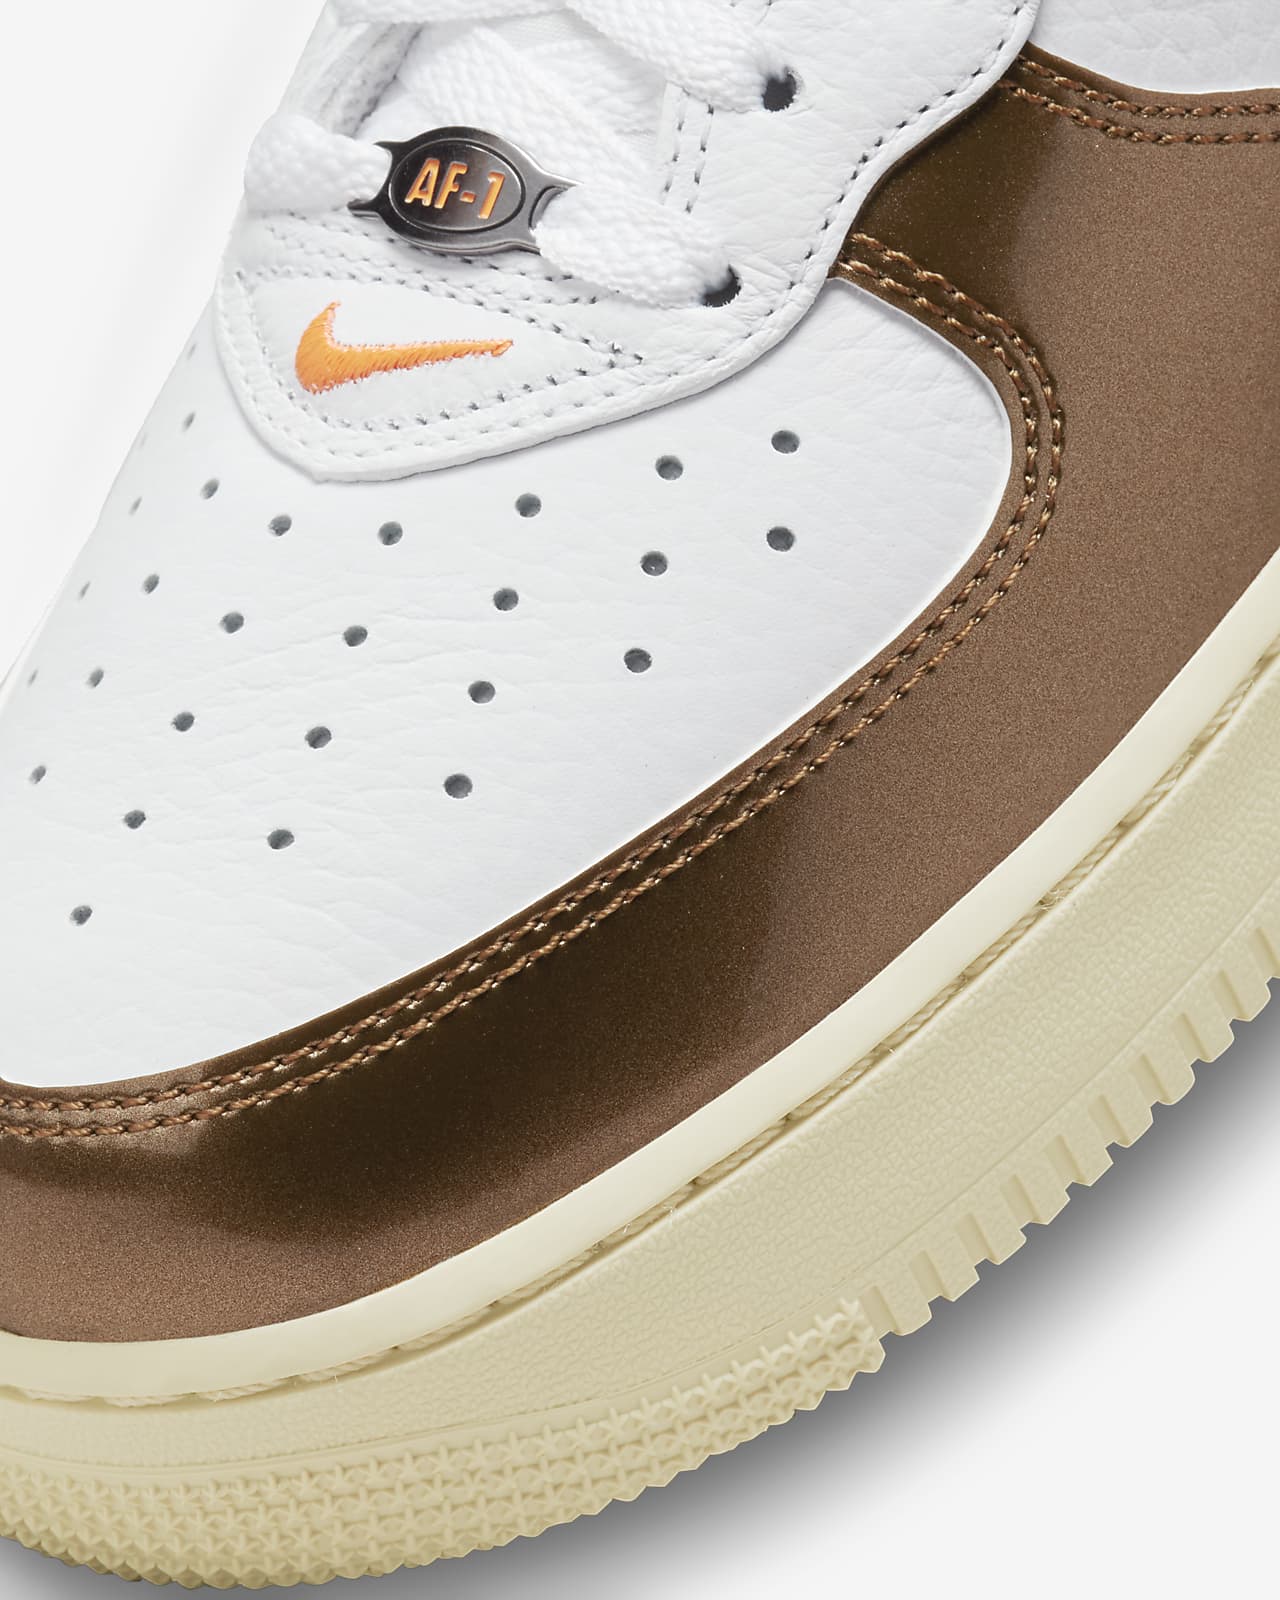 Nike Air Force Mid QS Men's Shoes.